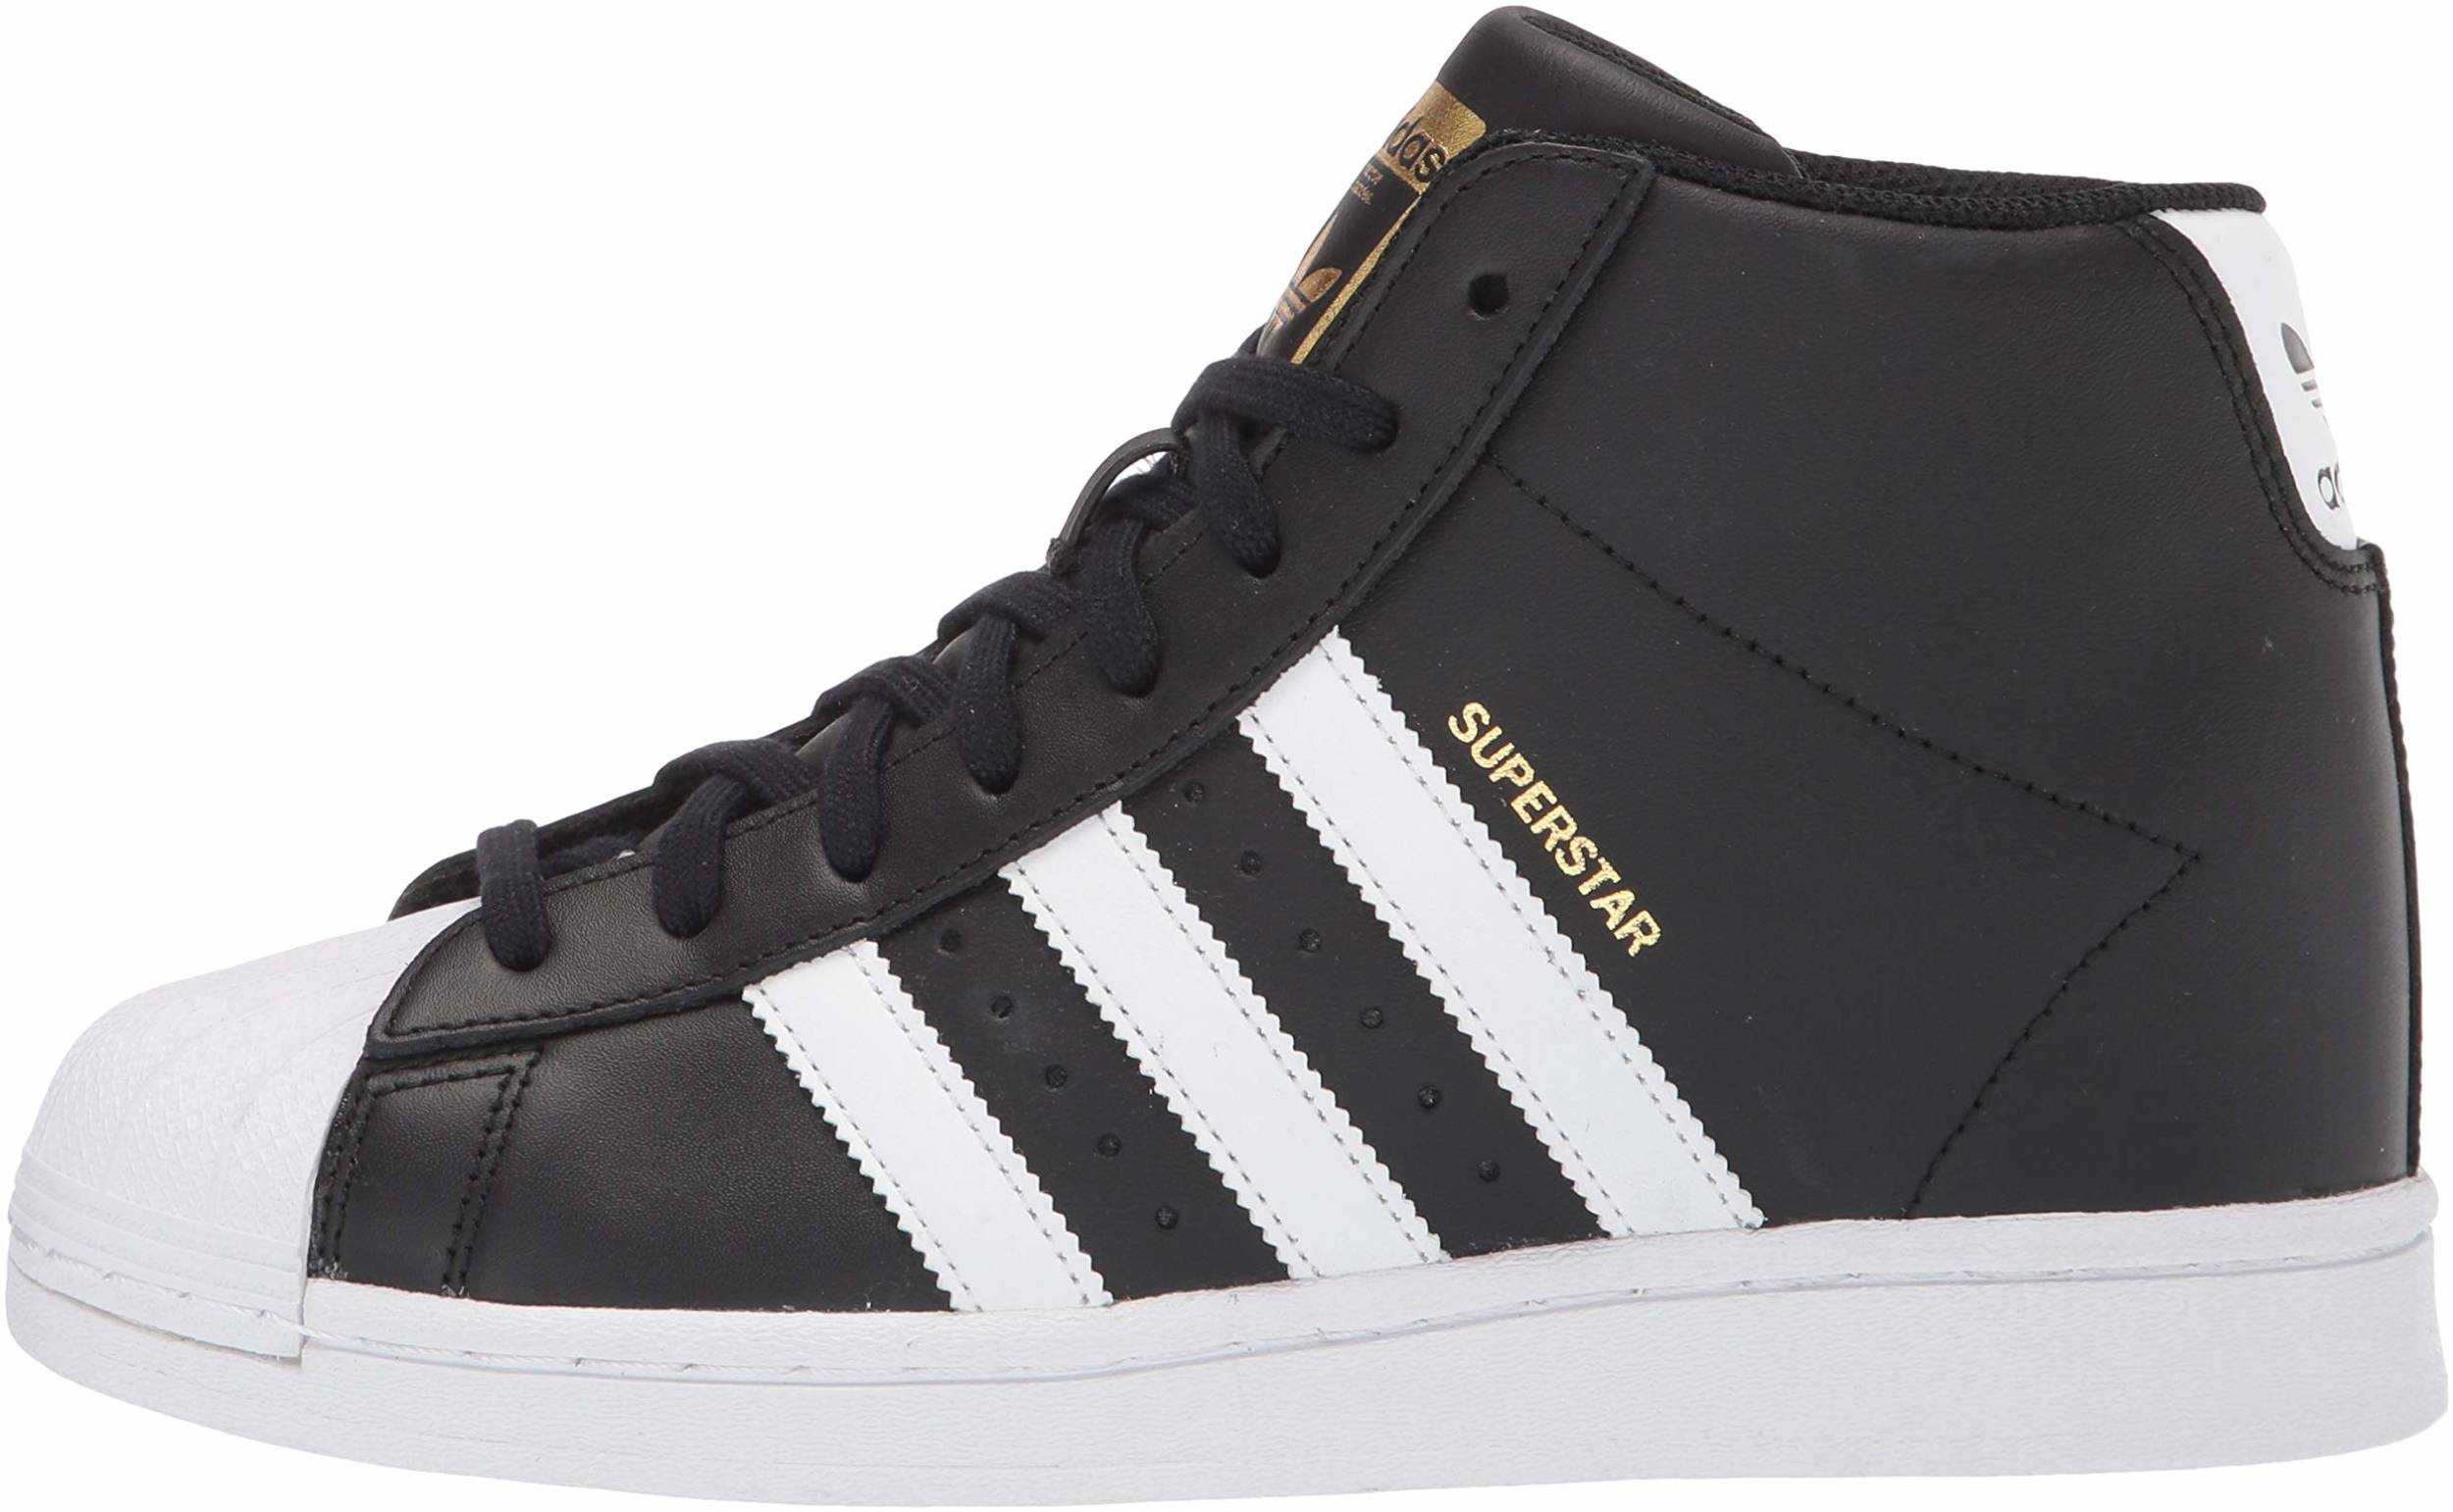 black and white adidas superstar high top